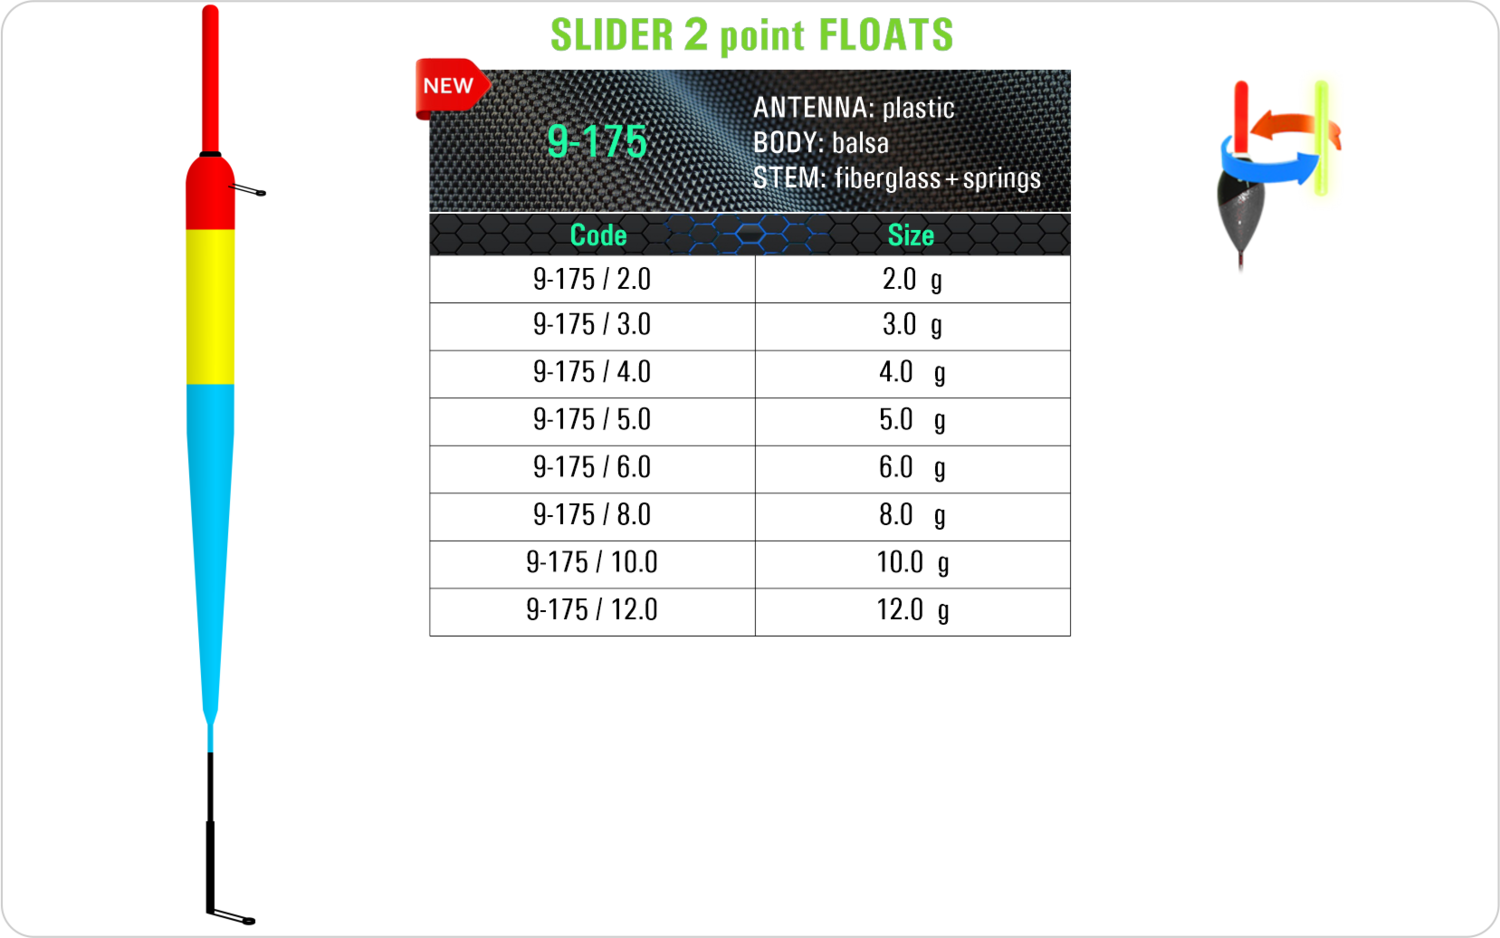 SF 9-175 - Lake and river float model and table containing an additional information about this float with different codes, sizes, types of the body, the stem and the antenna of the float.